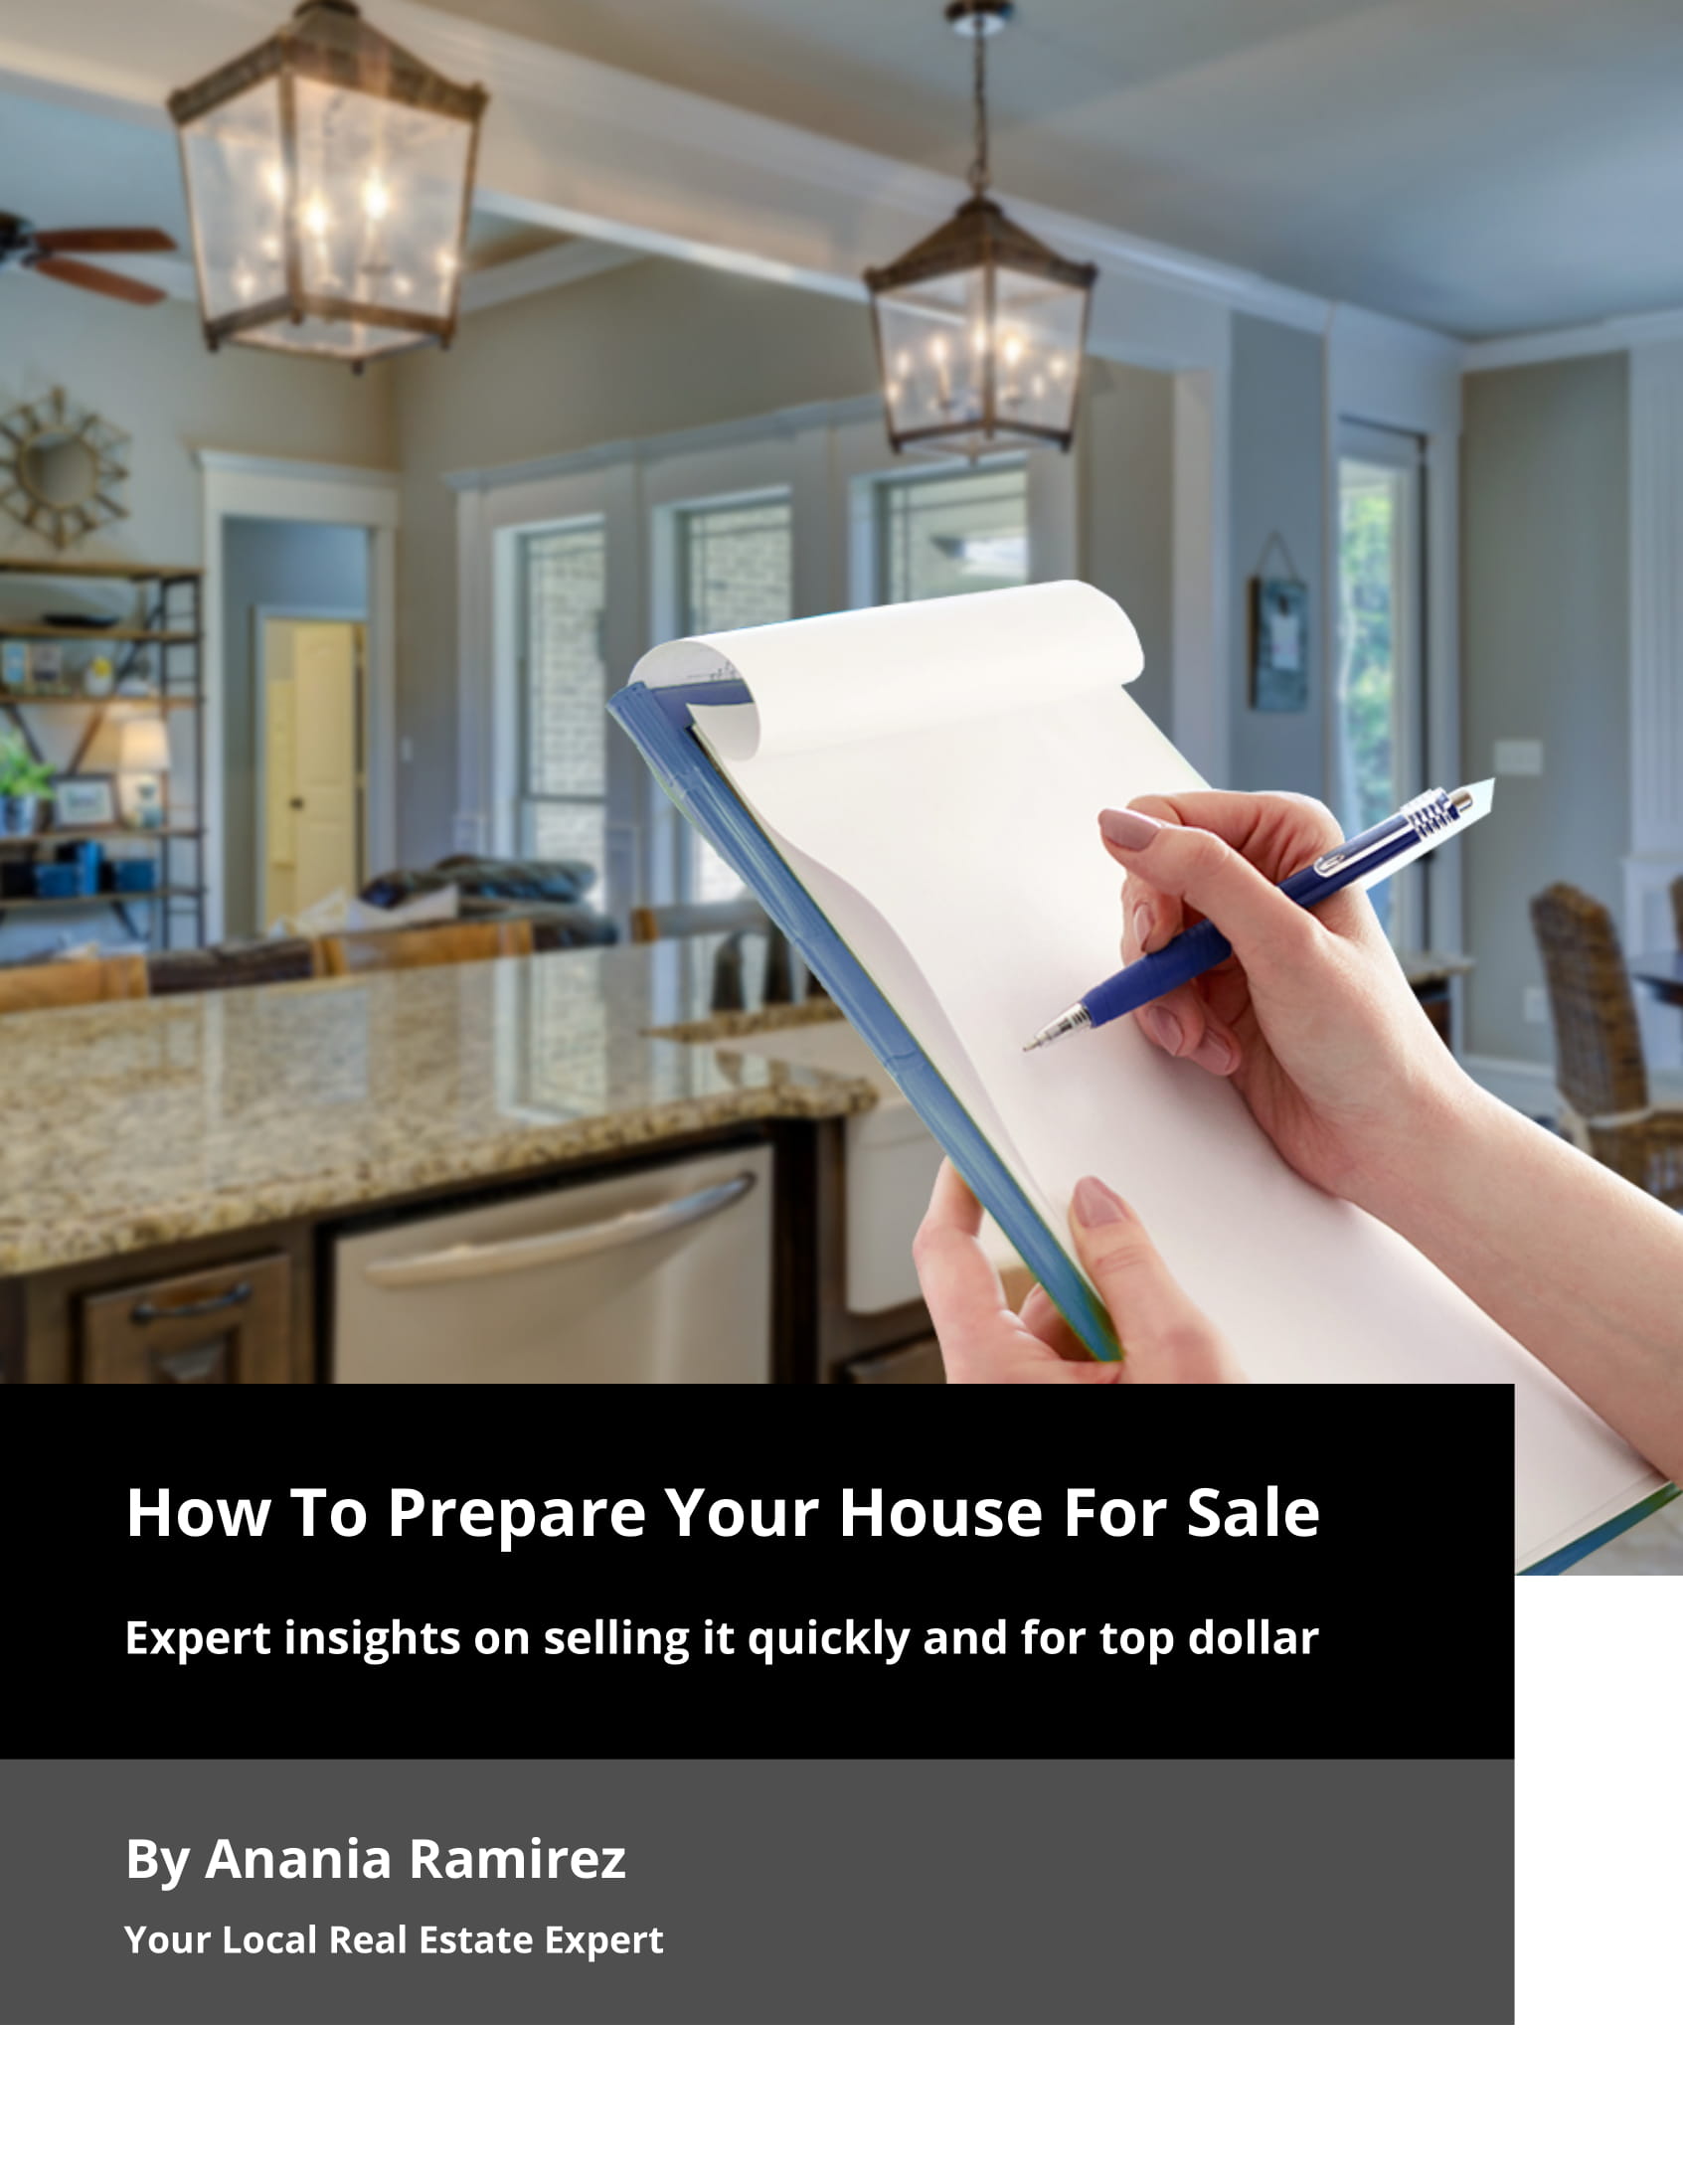 How To Prepare Your House For Sale